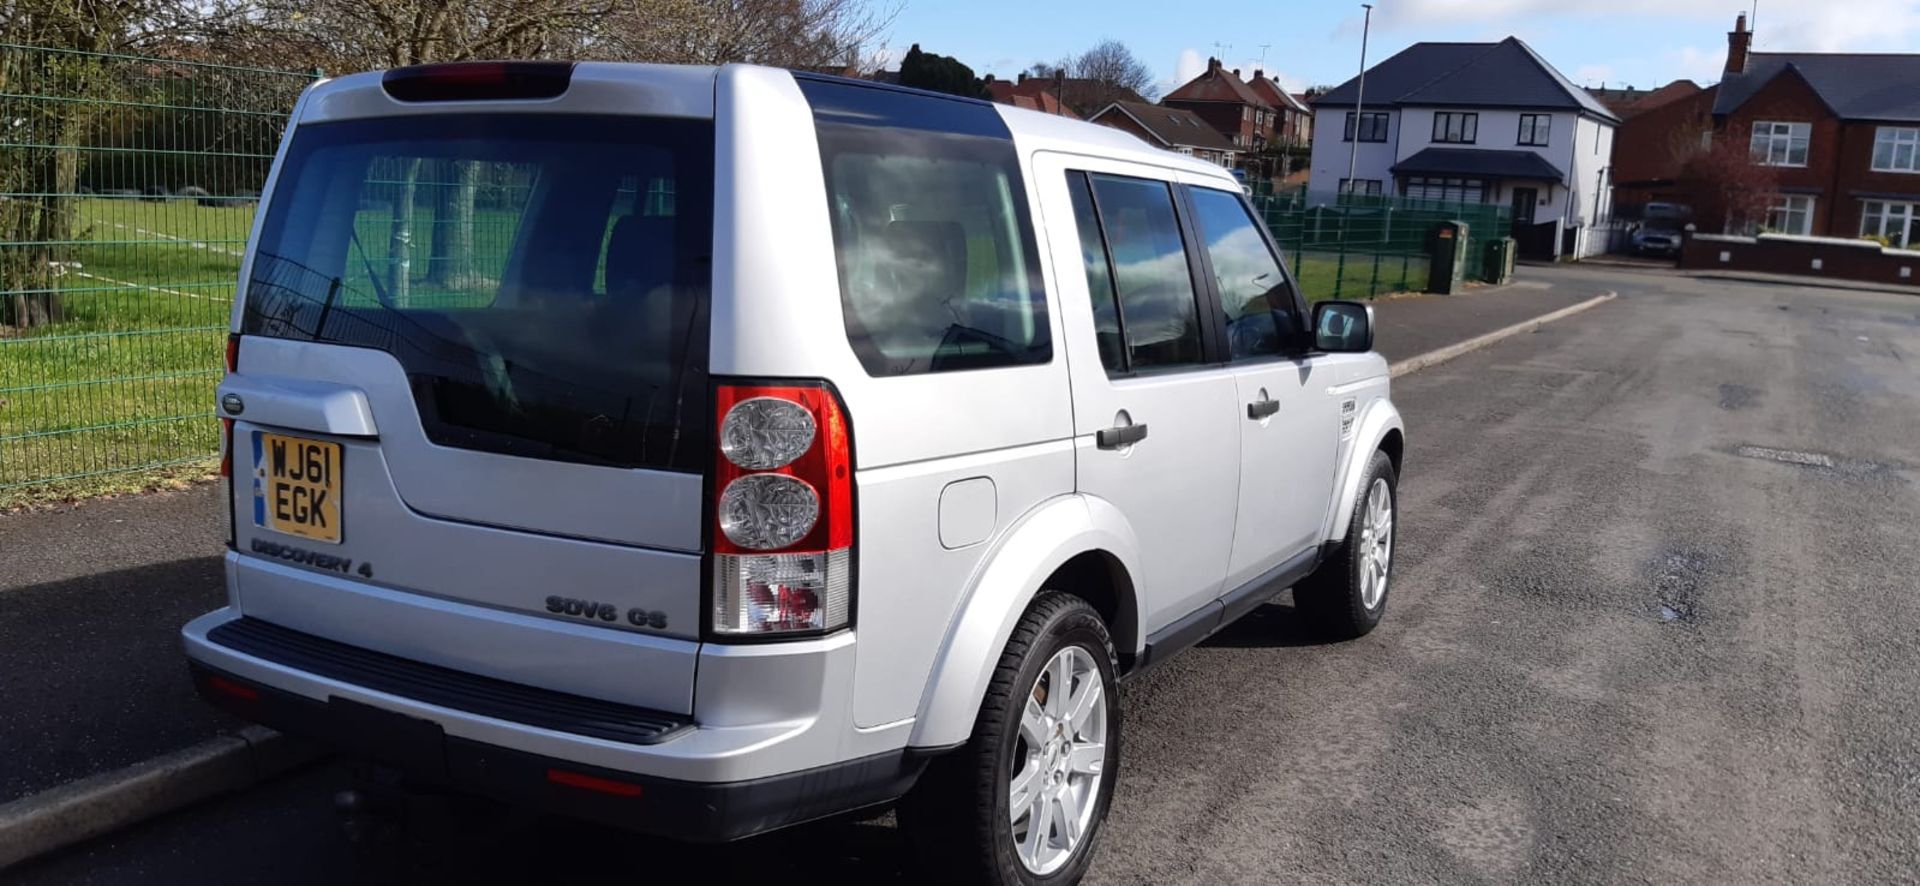 LAND ROVER DISCOVERY GS SDV6 AUTO 7 SEATER SILVER ESTATE, 127K MILES *NO VAT* - Image 8 of 16